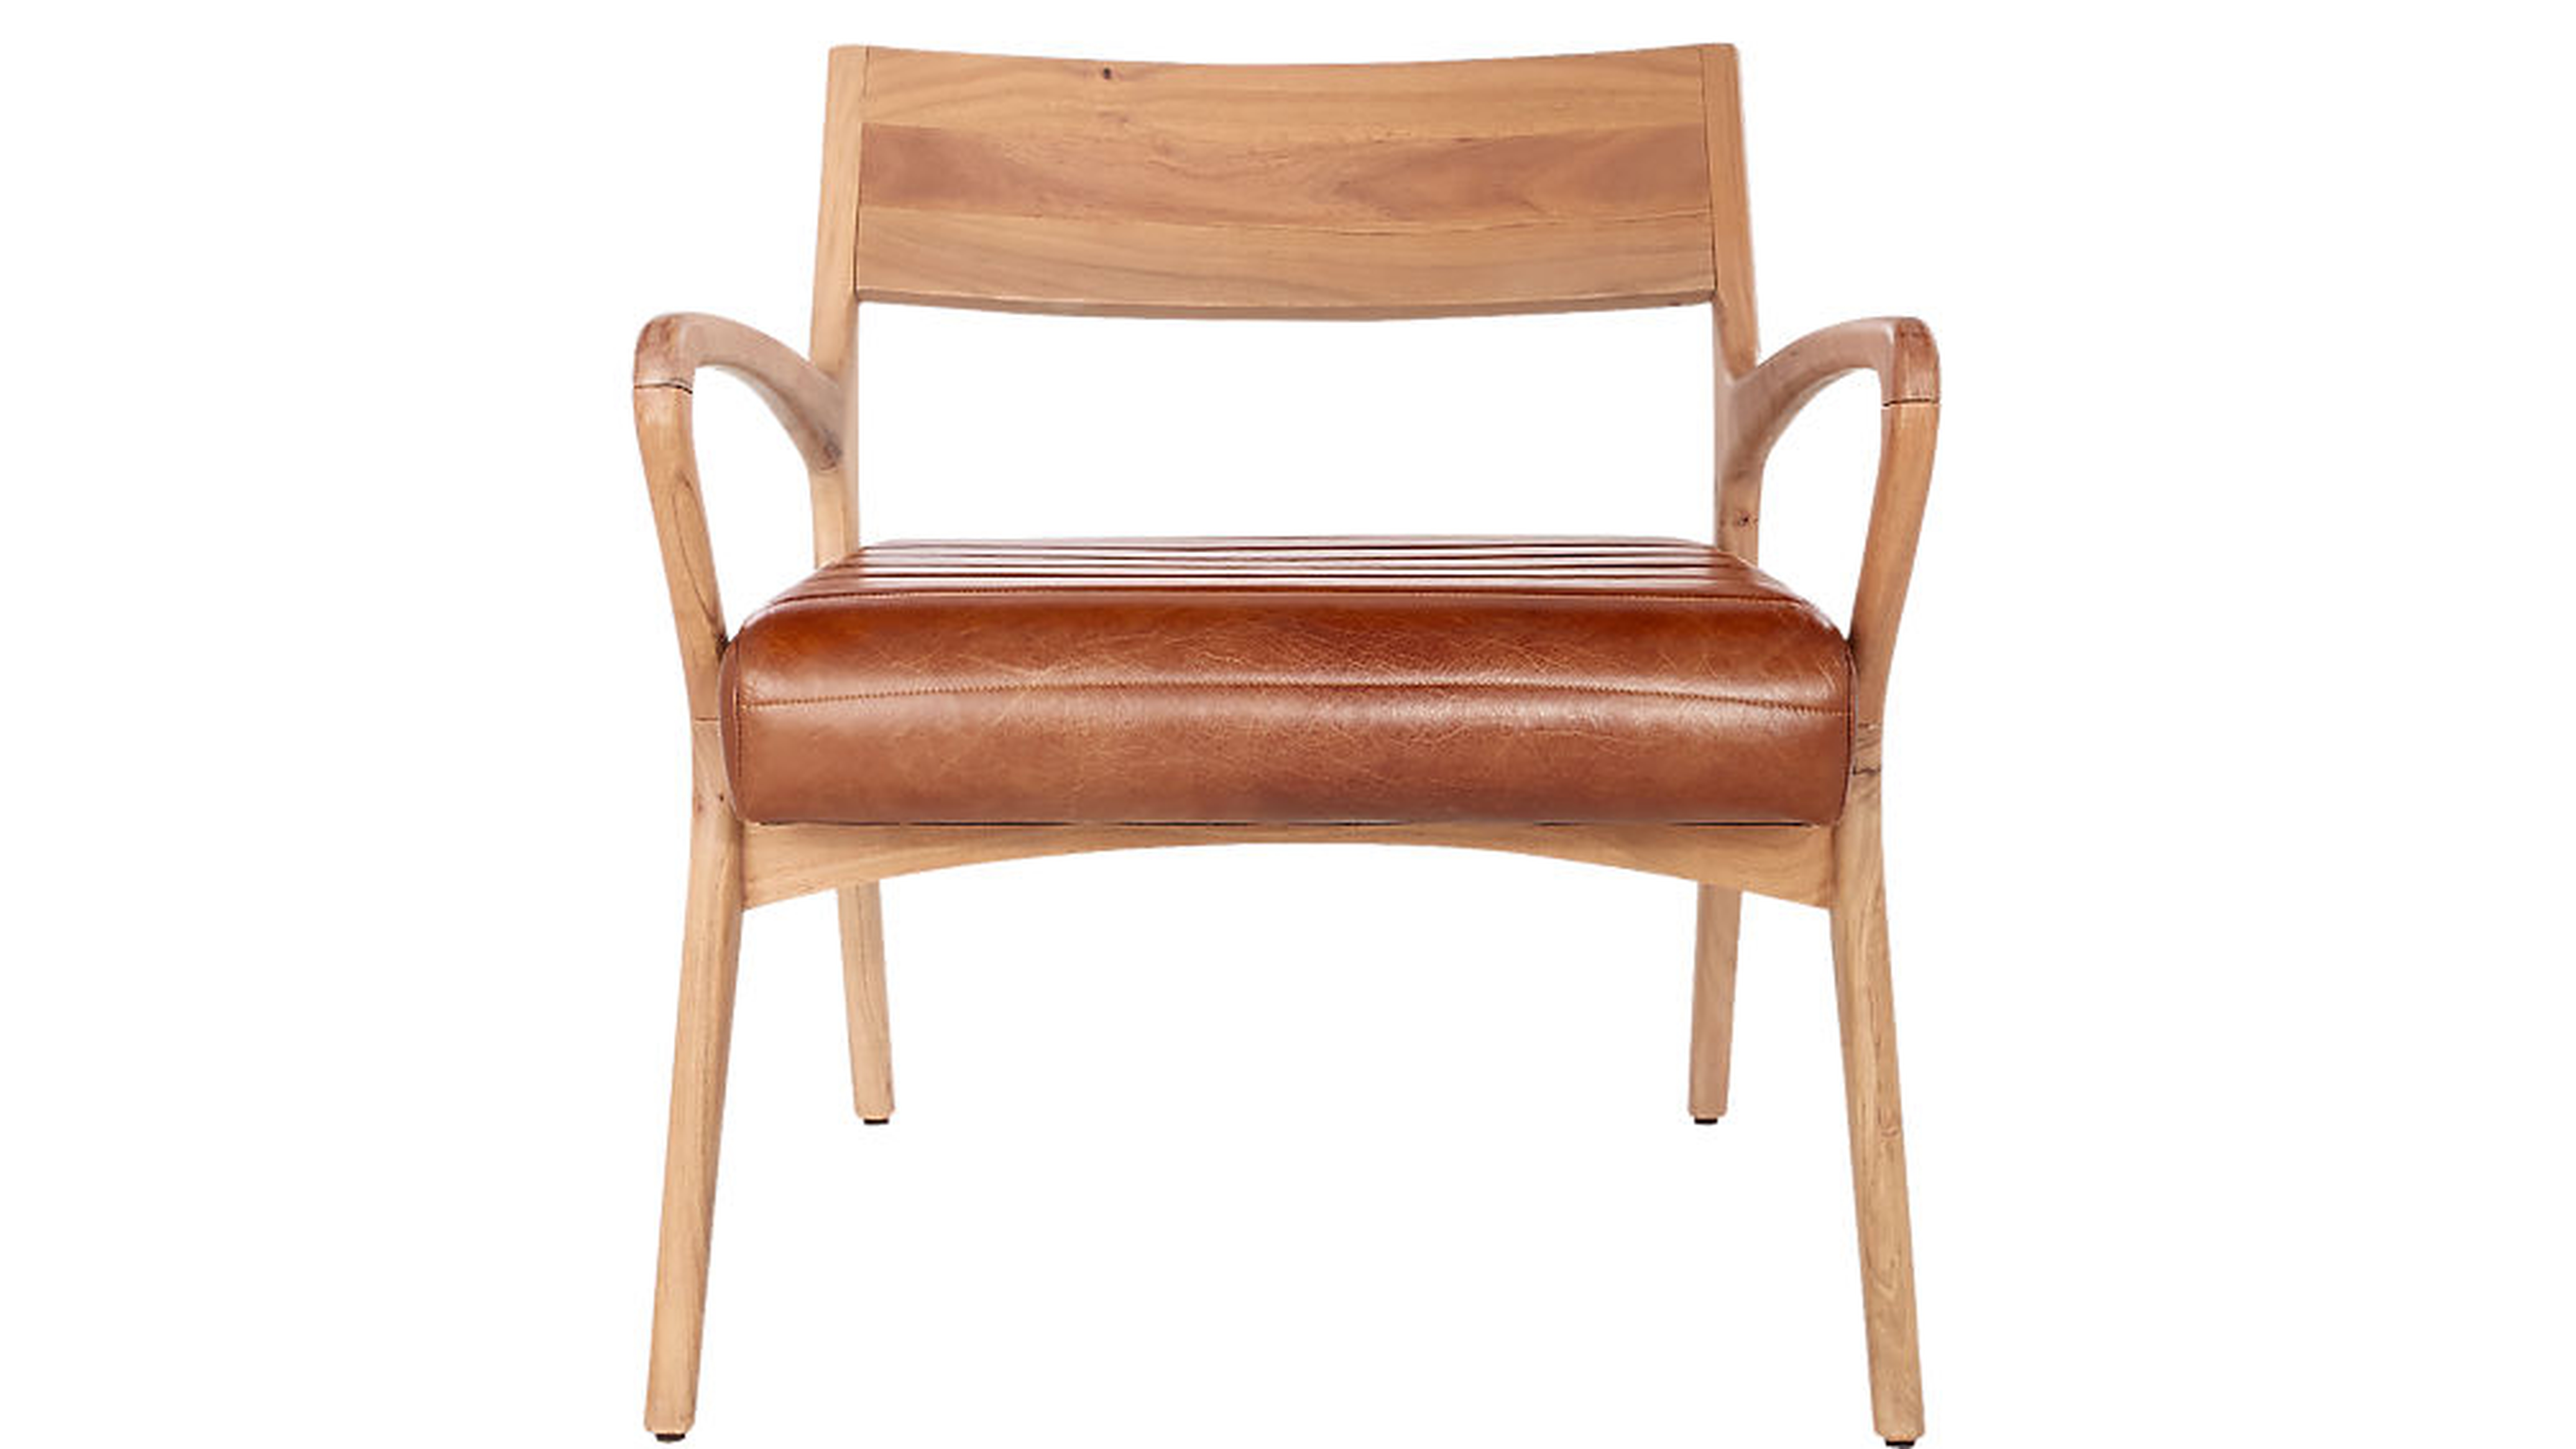 ALLEGRO WOOD AND LEATHER CHAIR - CB2